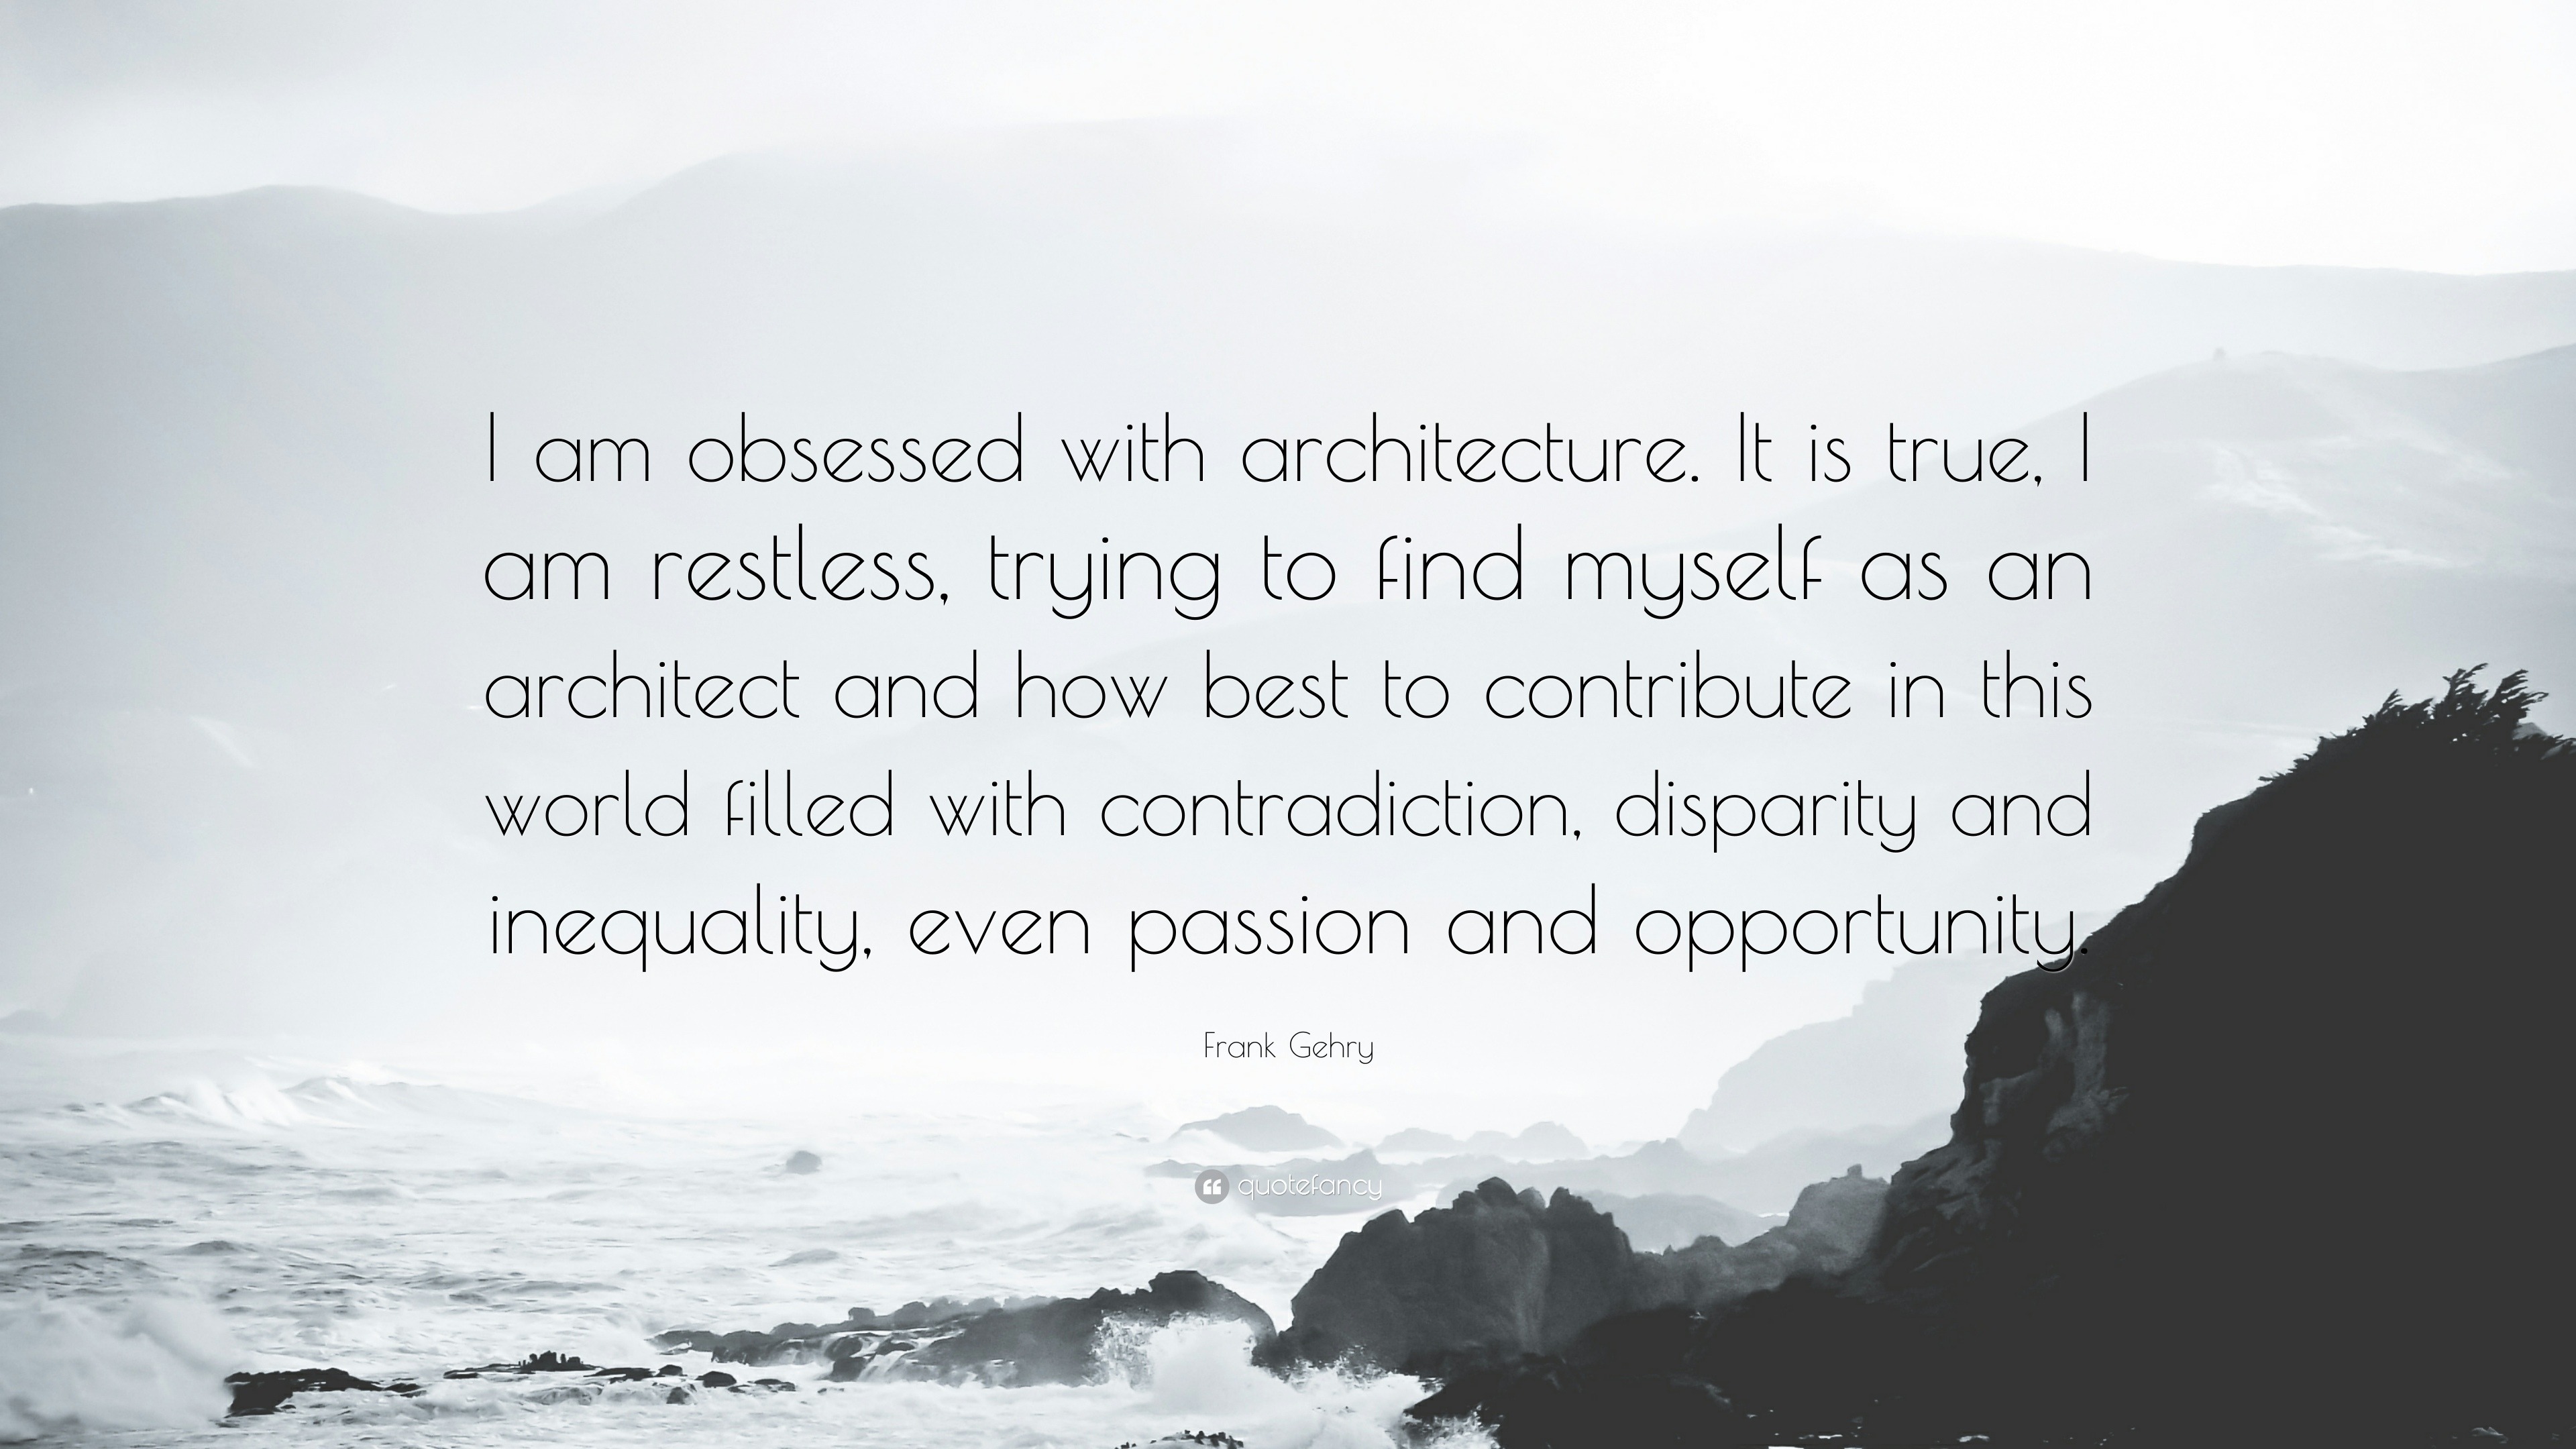 Frank Gehry's Words of Wisdom